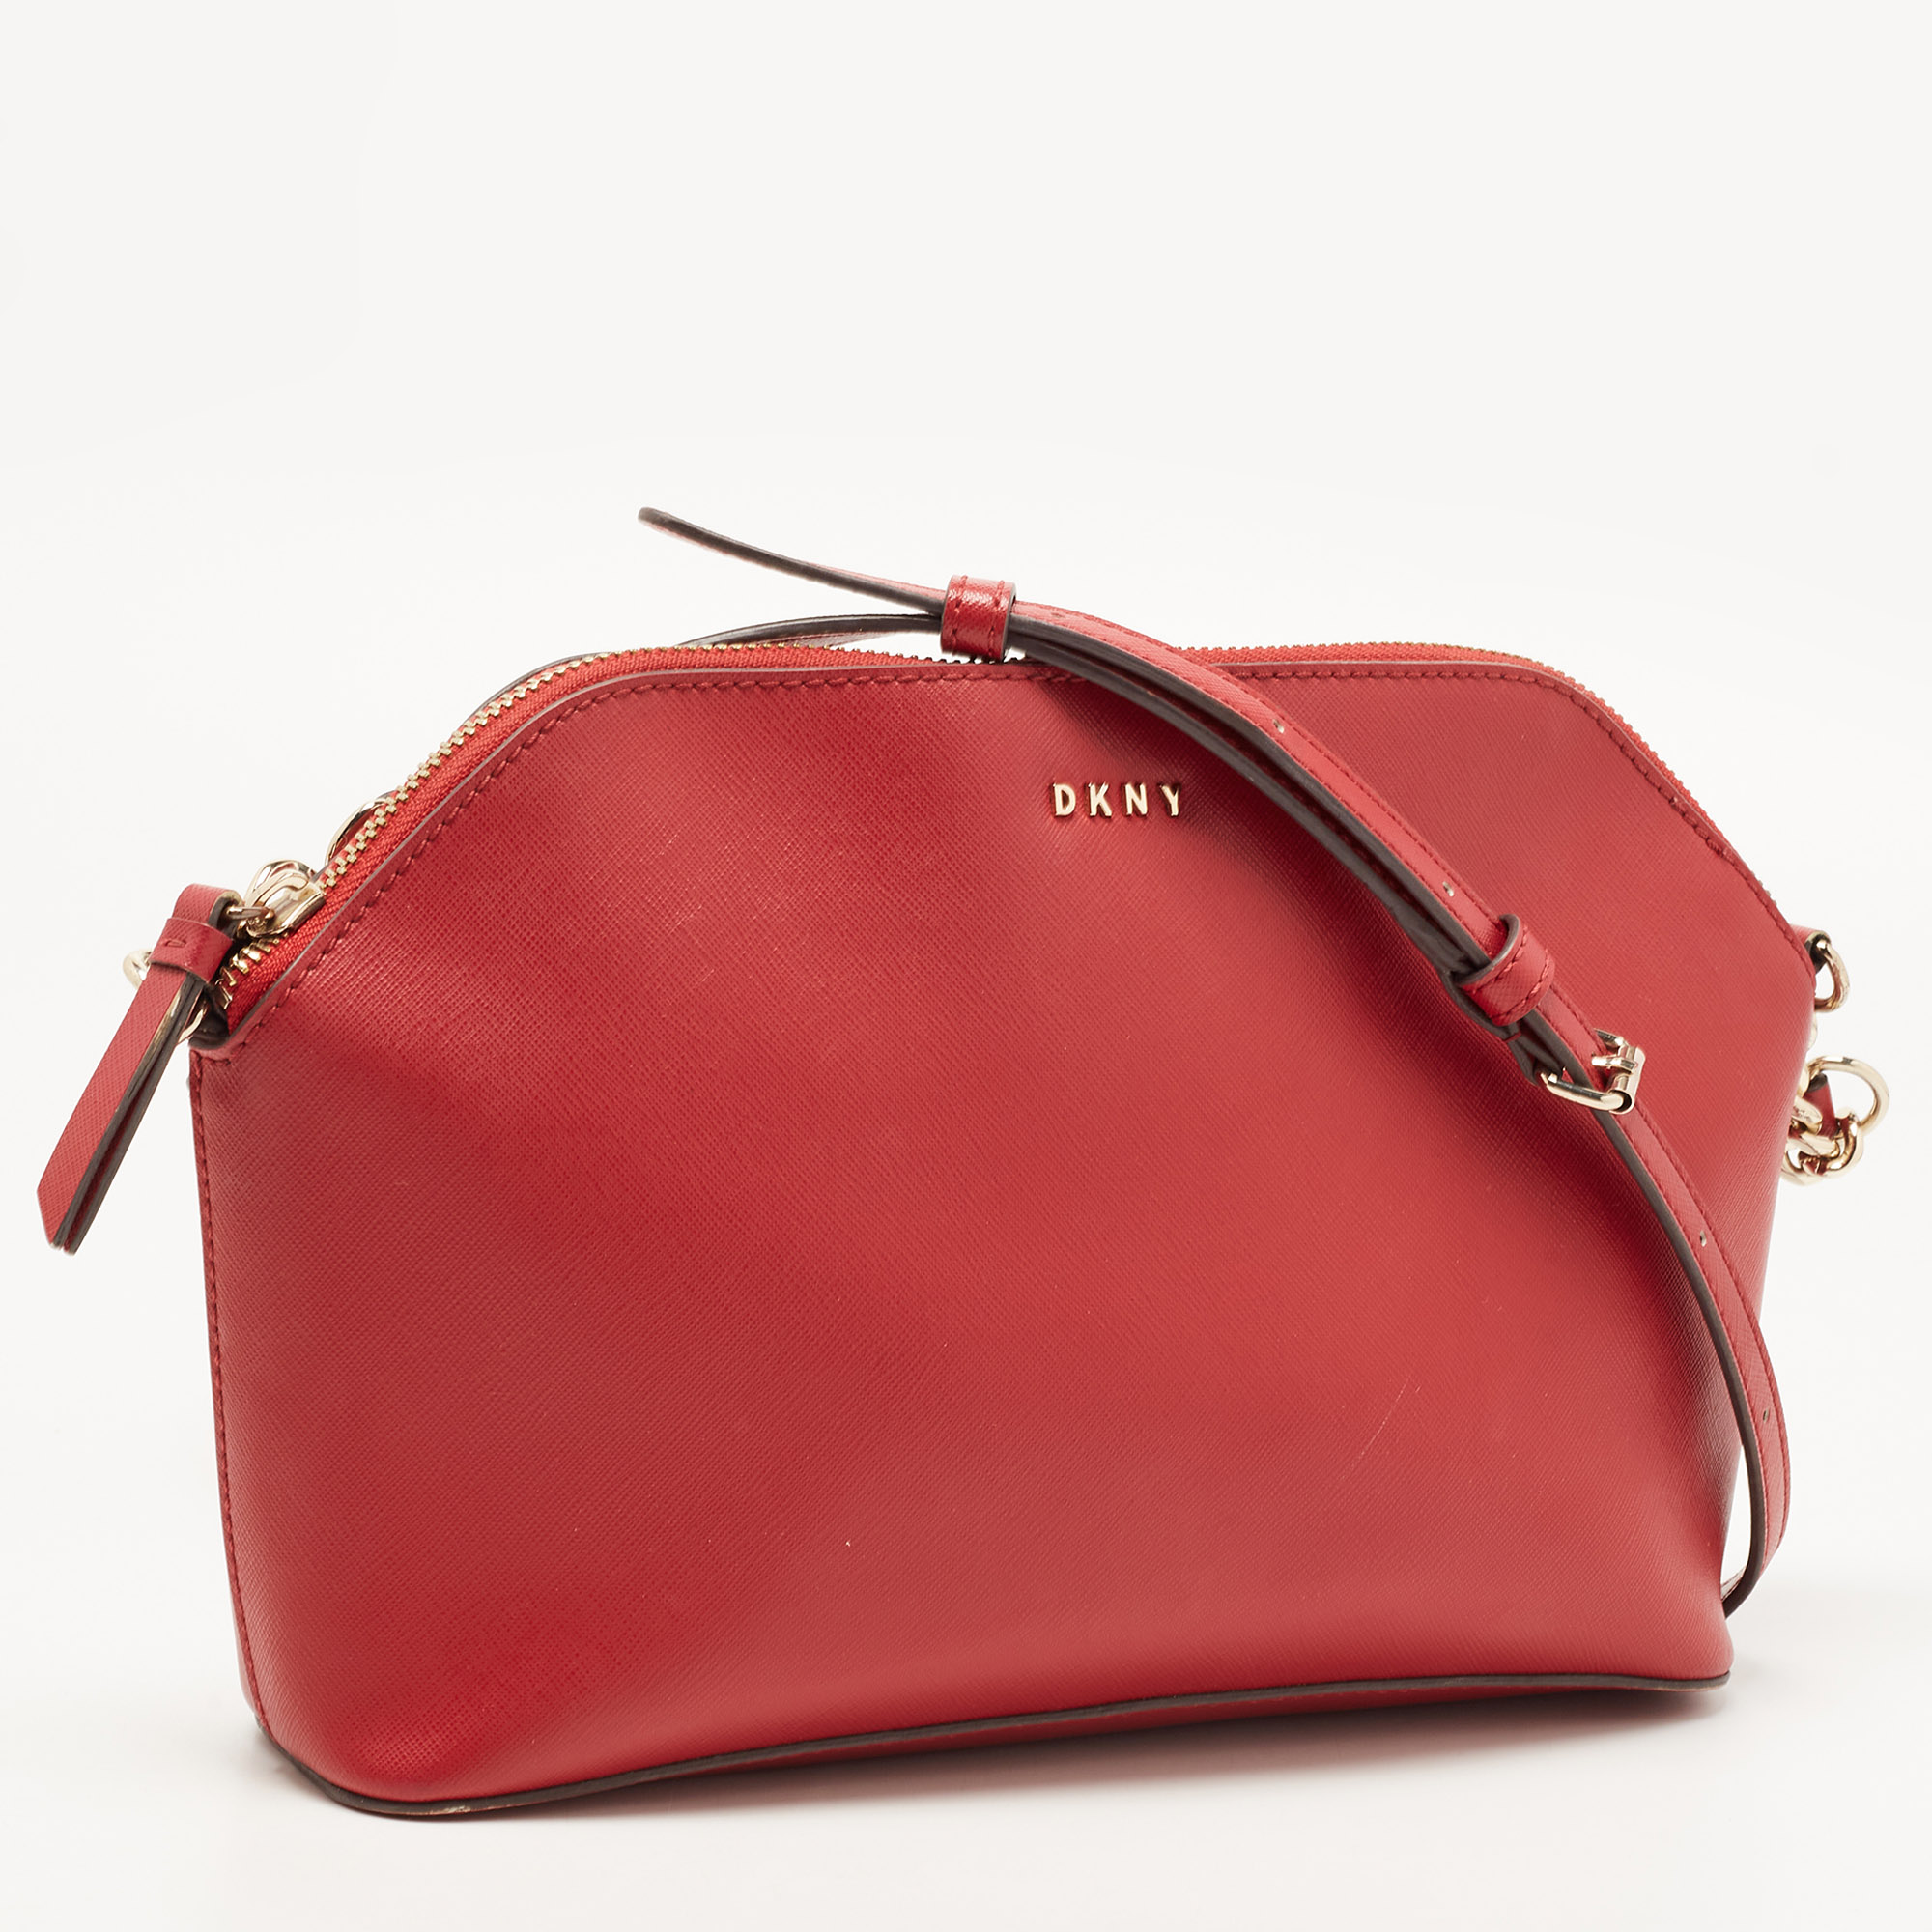 DKNY Red Leather Dome Crossbody Bag